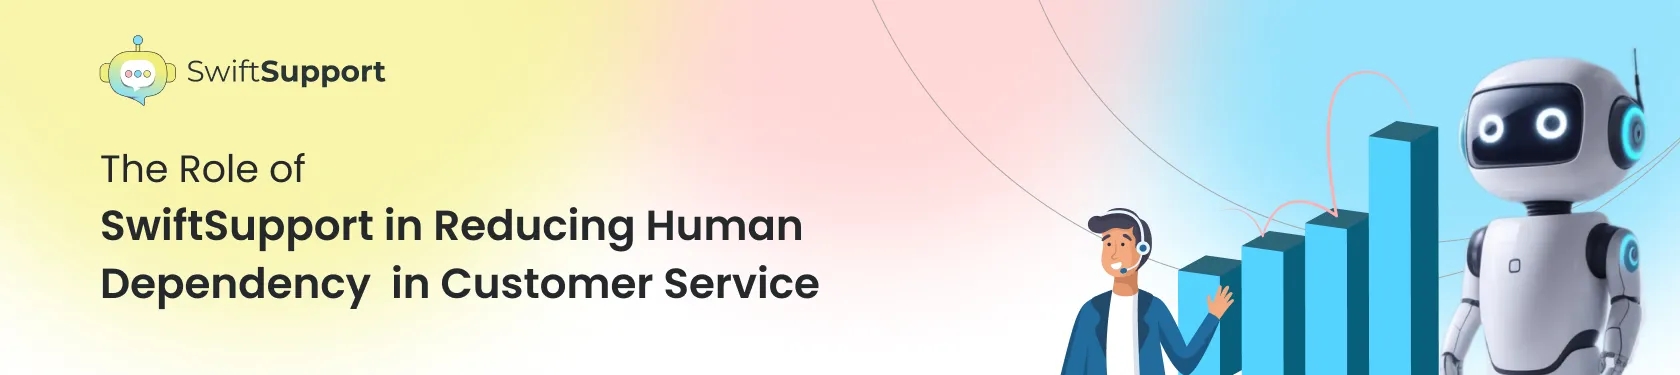 swiftsupport in customer service banner image